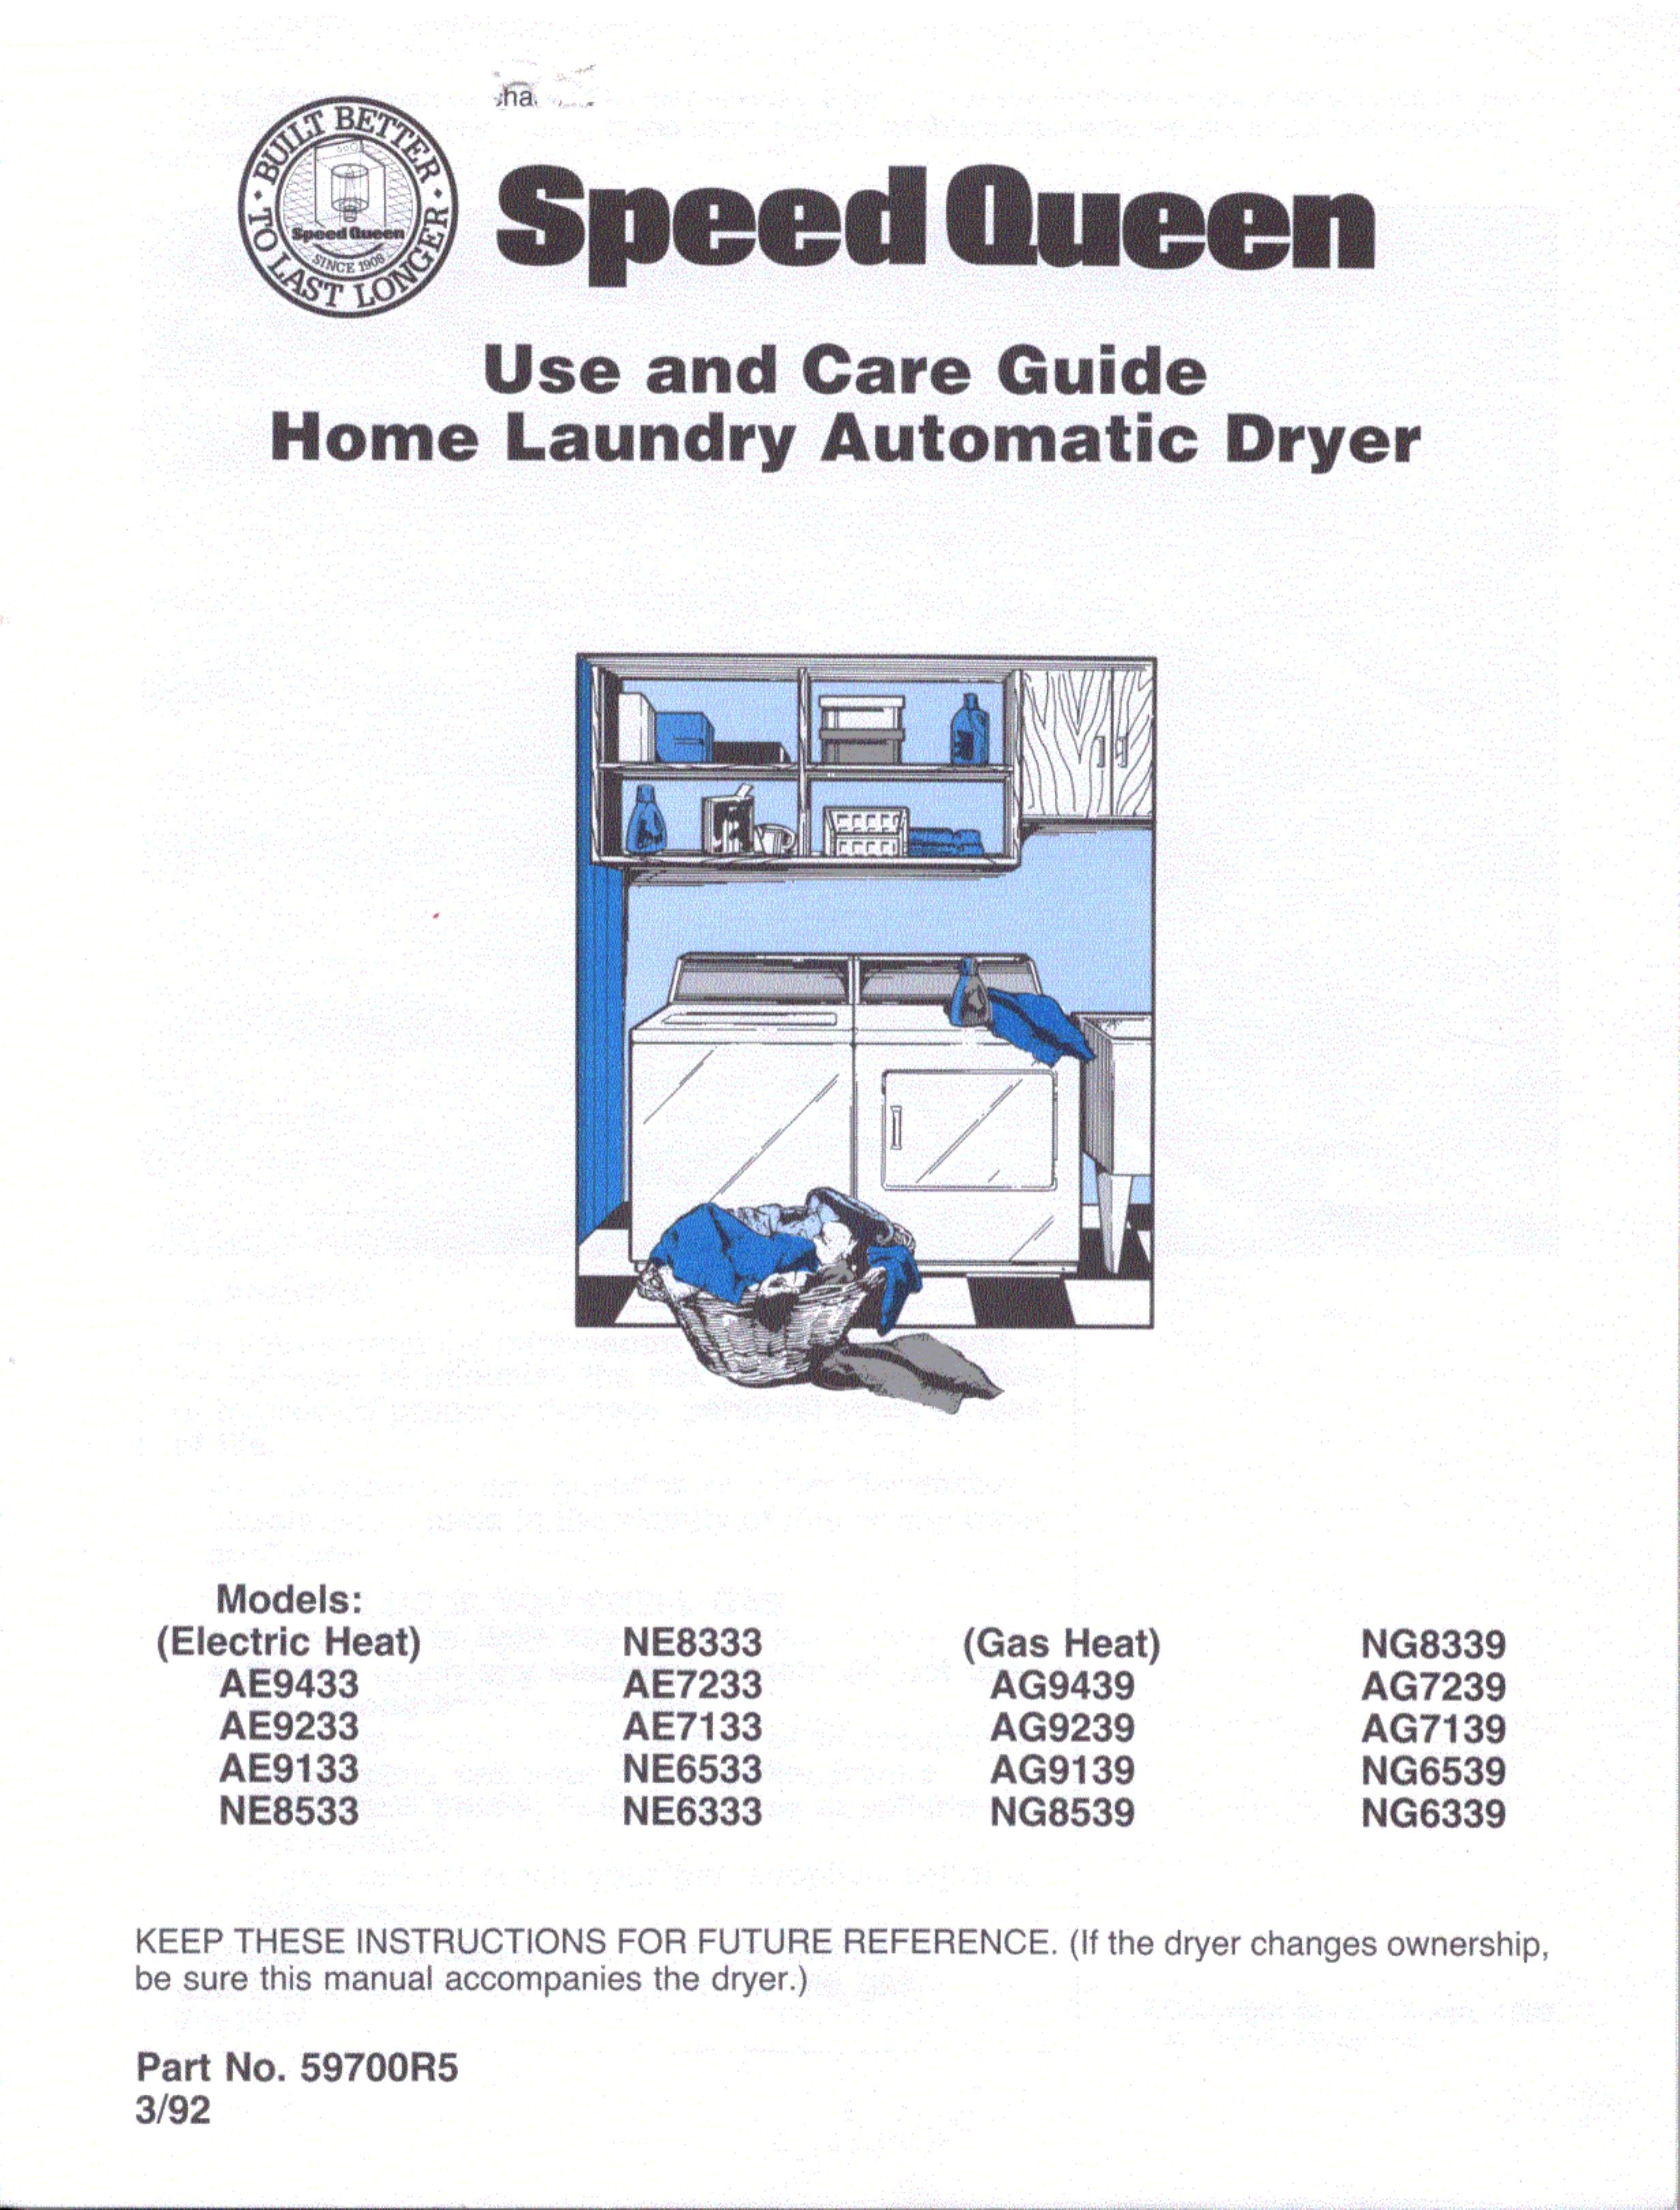 Speed Queen AE9433 Clothes Dryer User Manual